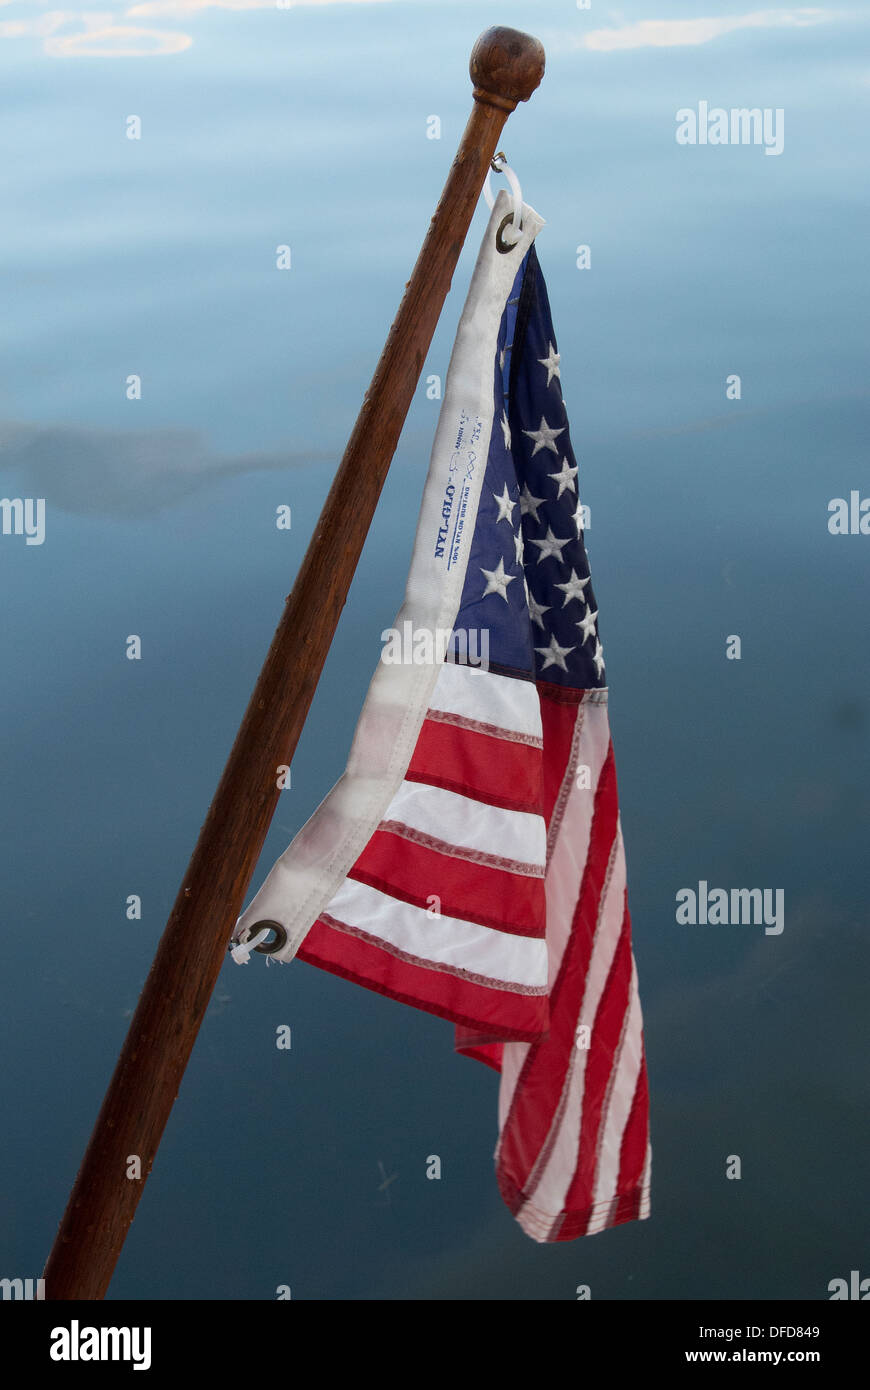 American flag on boat. Stock Photo